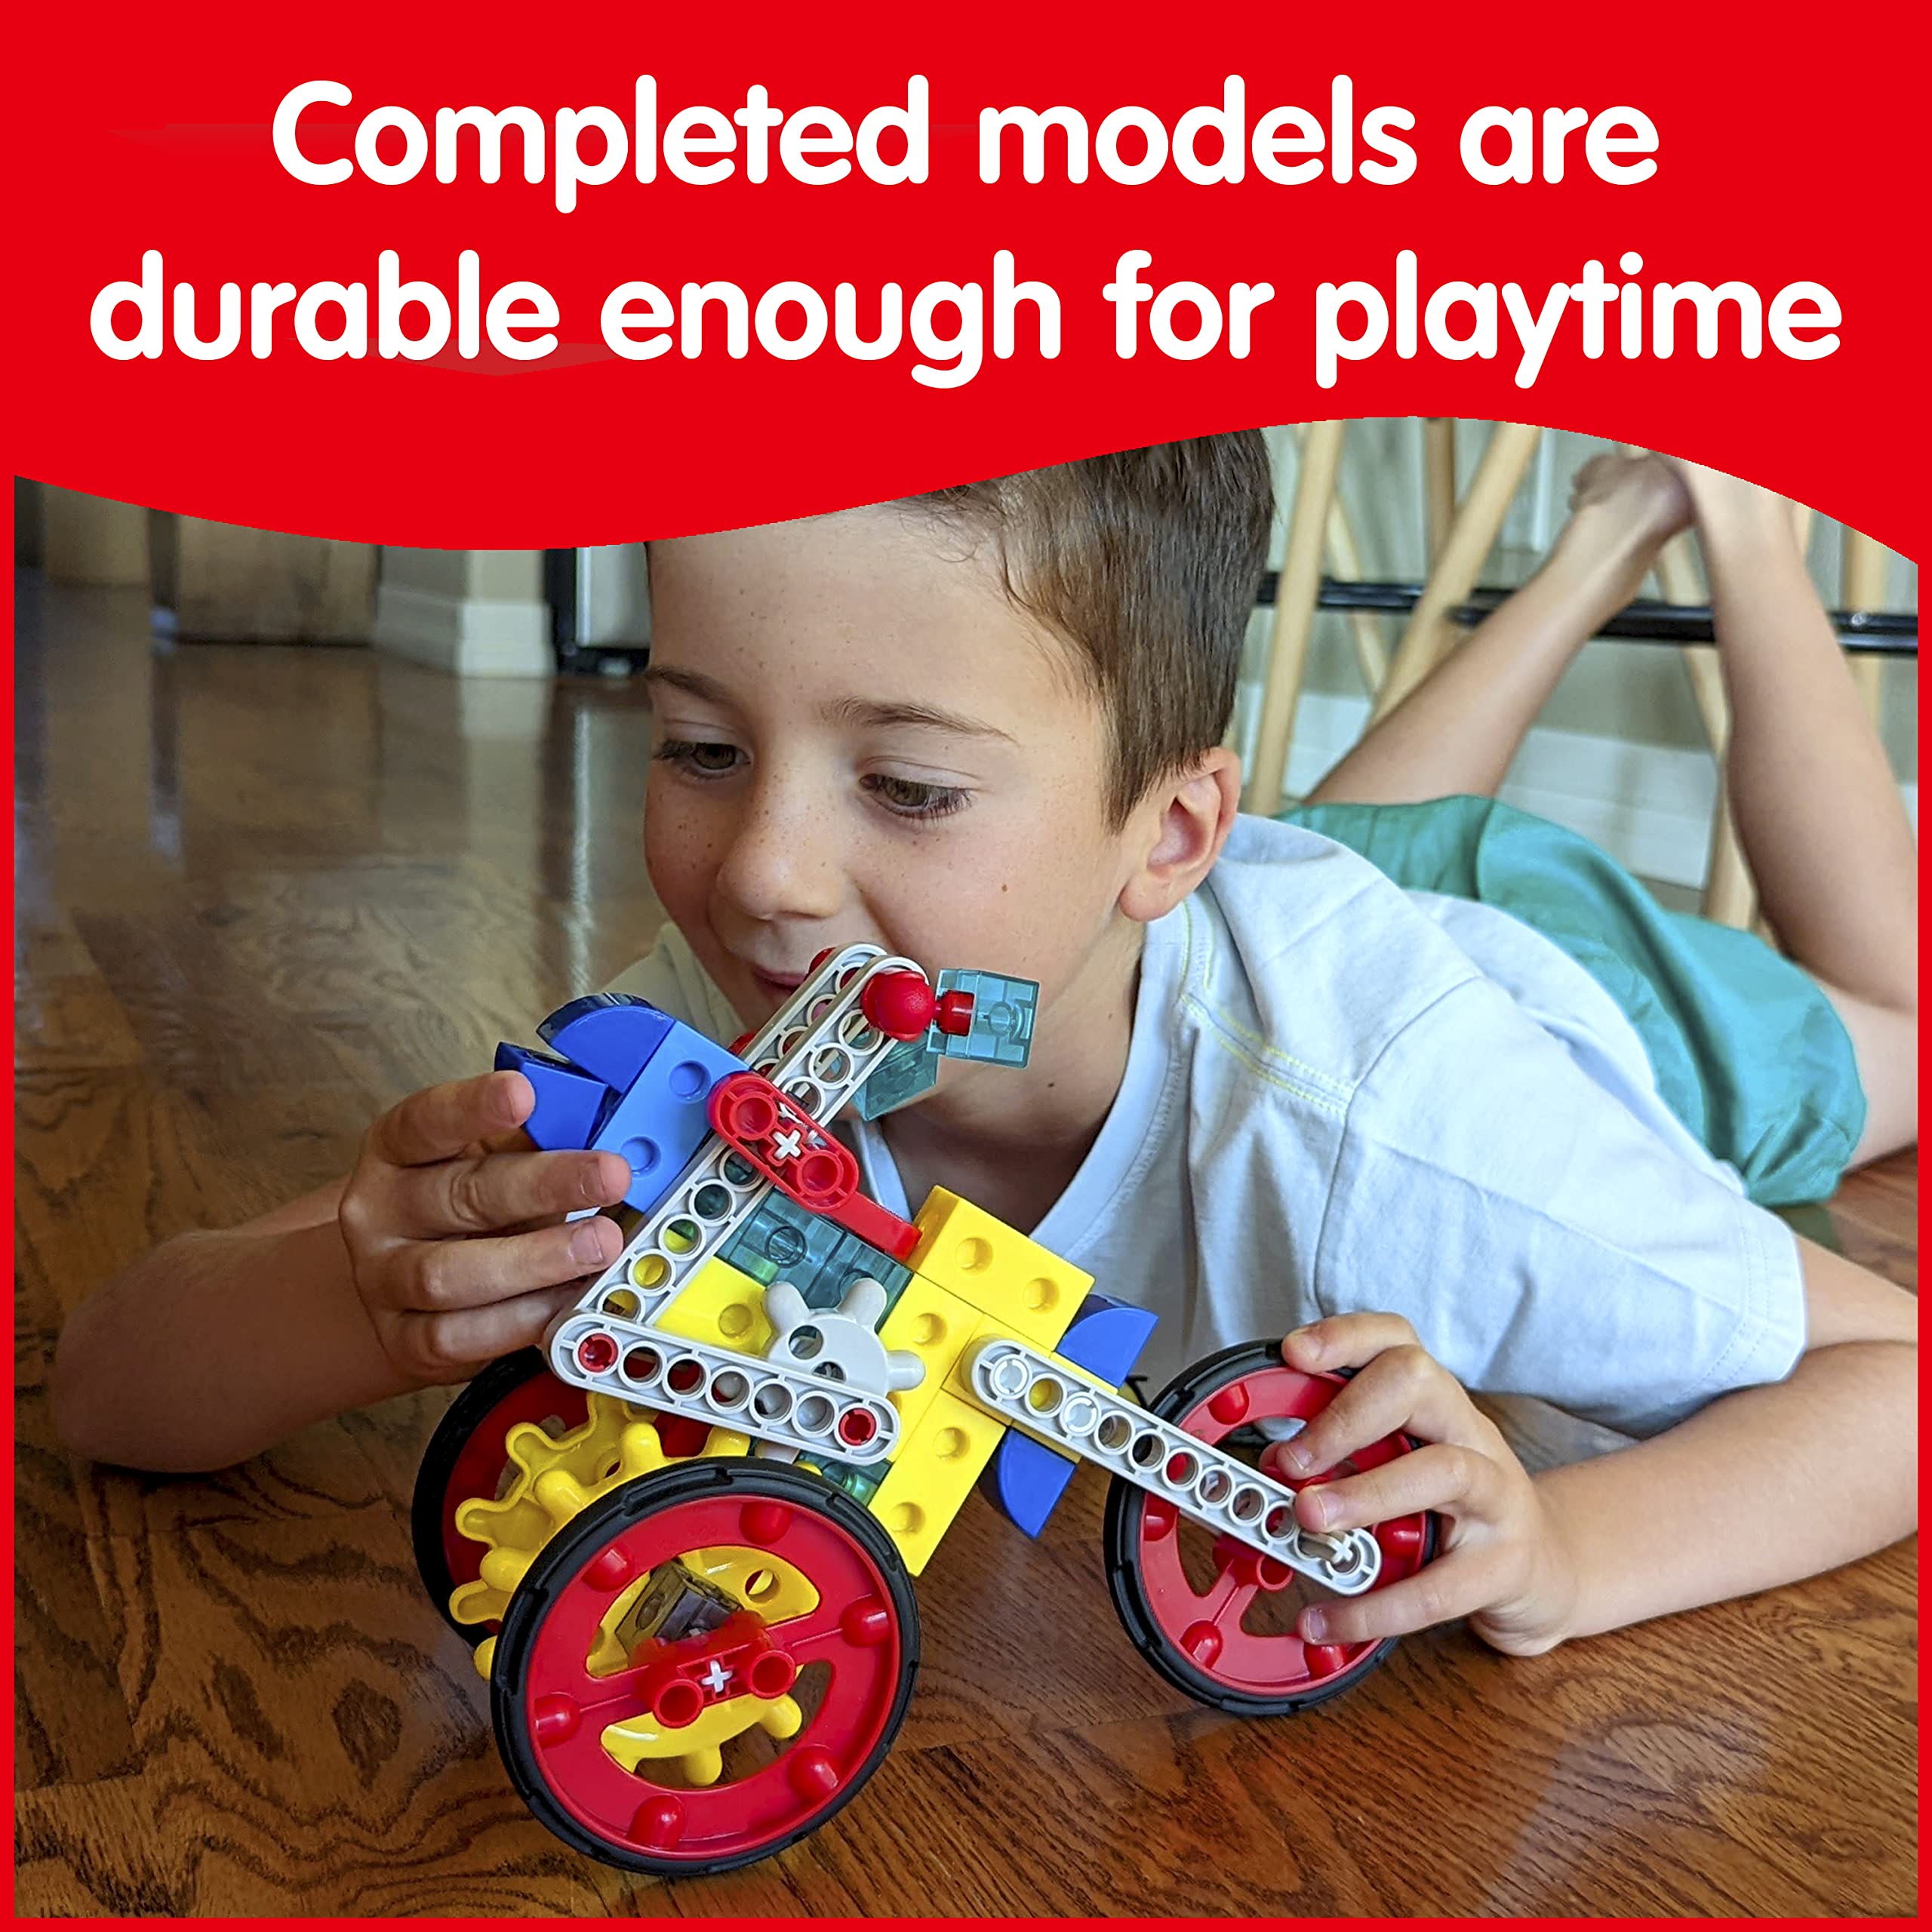 My Gears Transport Set - 118 Pieces - 8+ Activities - Gears Toys for Kids - Build Rotating, Moving Models - Building Toys for Kids Ages 4-8